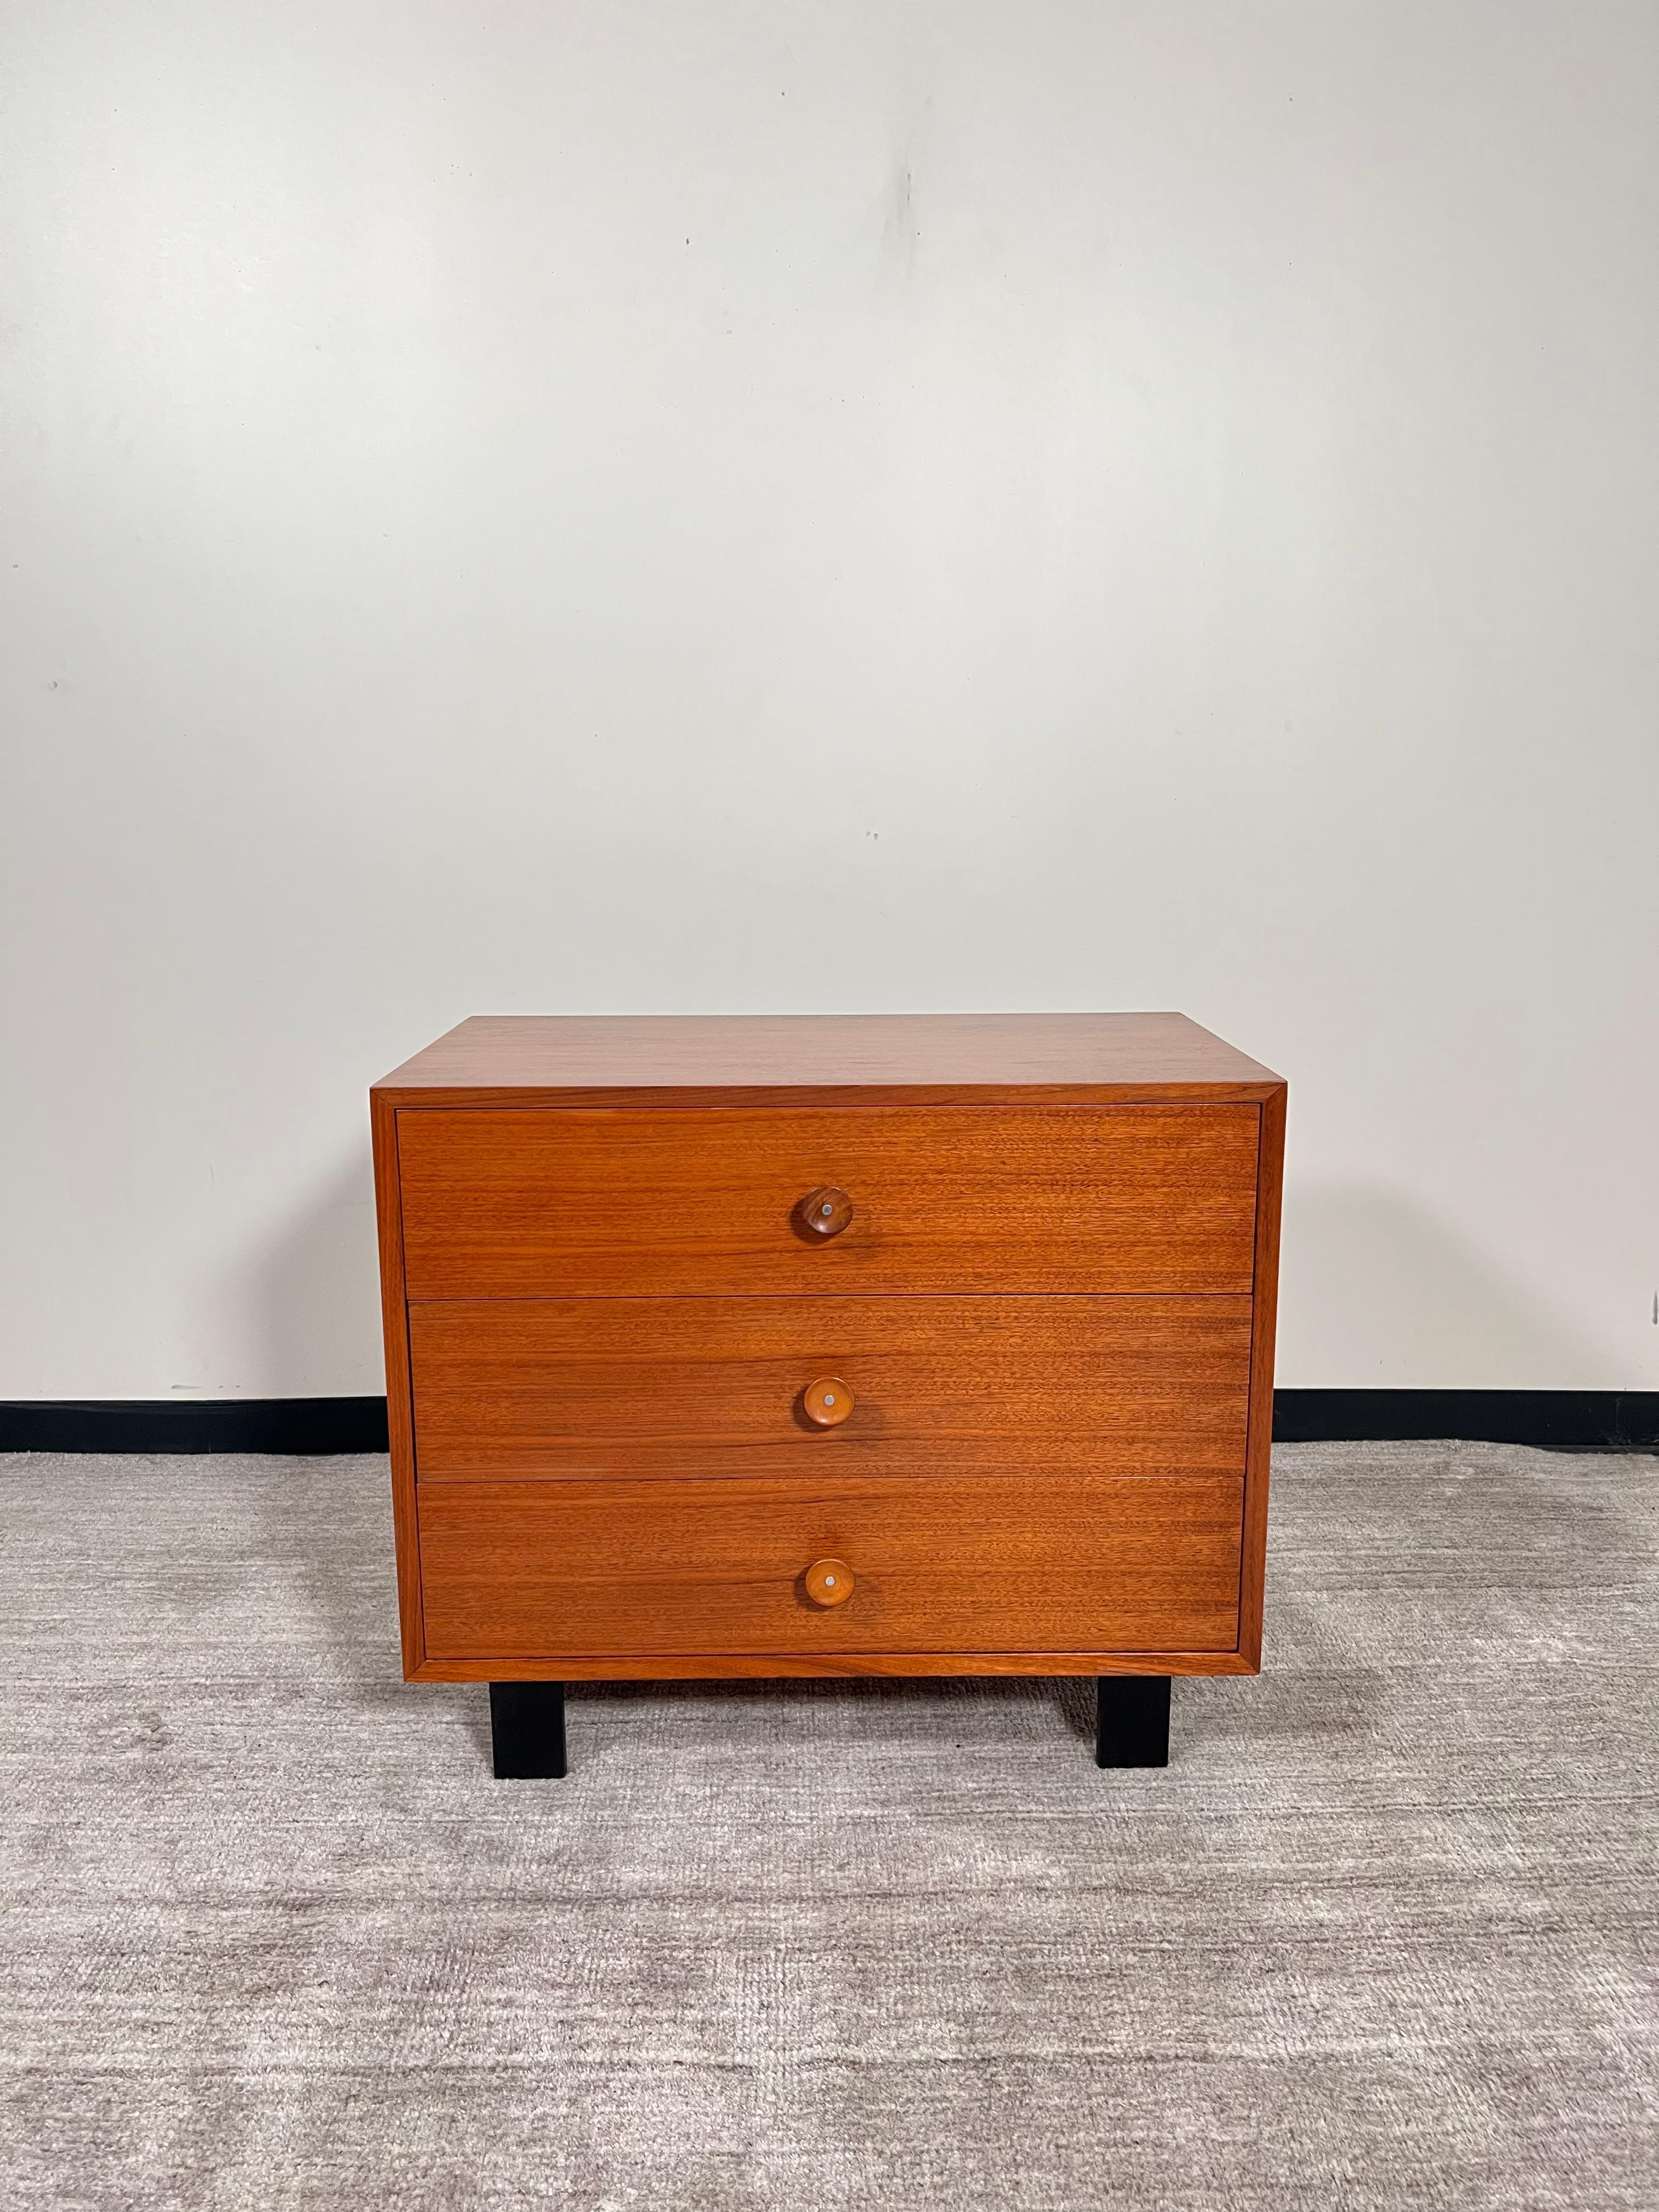 This fantastic chest of drawers was designed by George Nelson for Herman Miller, part of the 'Basic Cabinet Series' and also called 'Primavera', this dresser is signed with a 1950's Herman Miller foil label. Newly refinished, this beautiful piece is